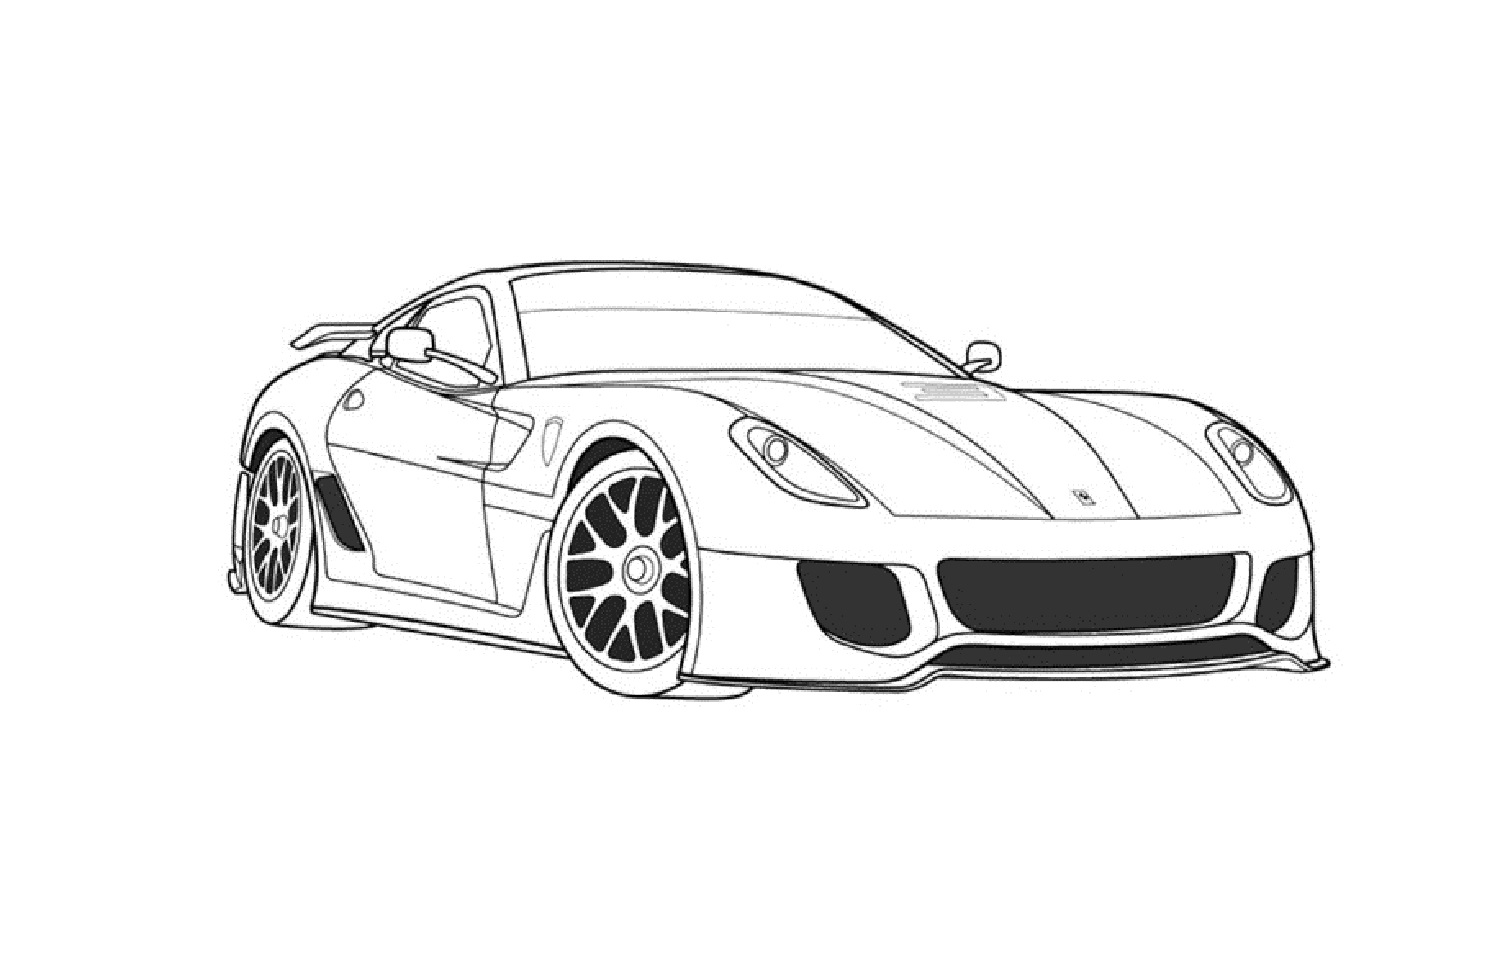 ferrari coloring pages to download and print for free